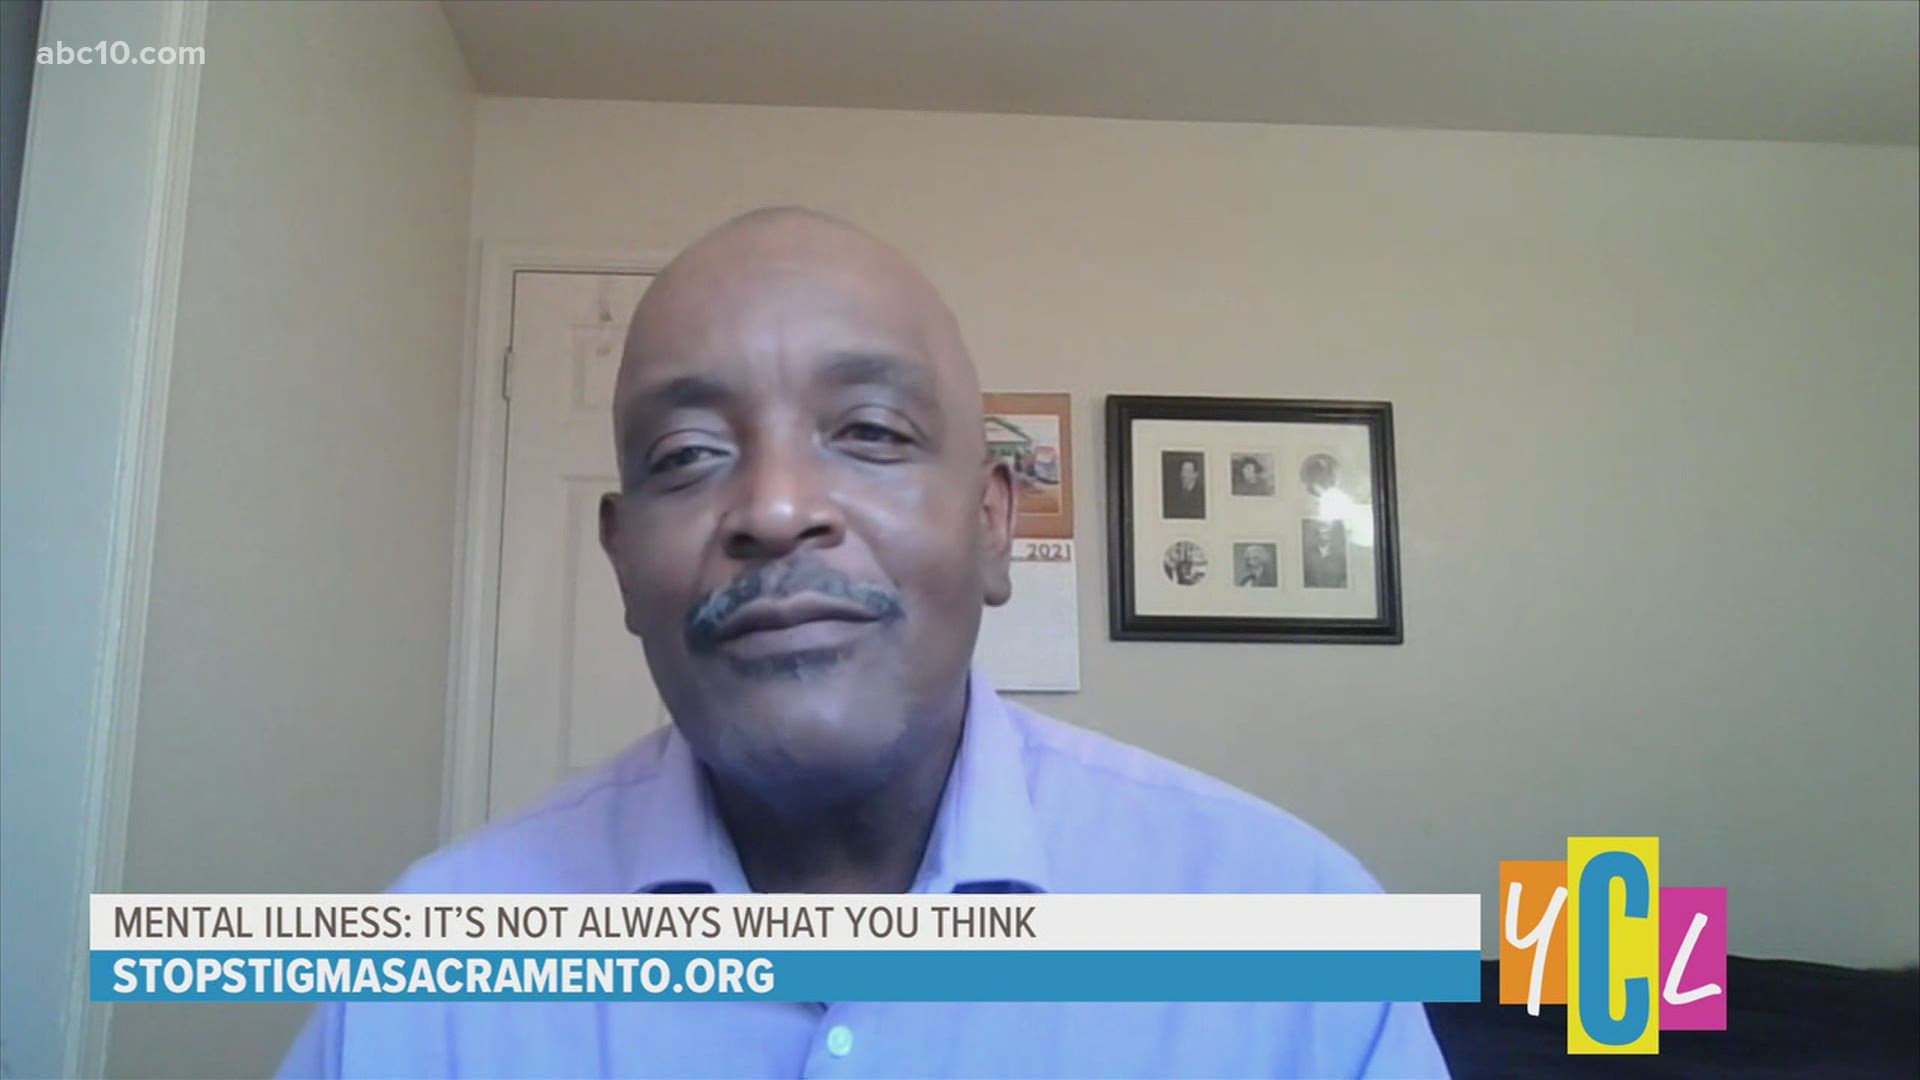 Stop Stigma Speakers Bureau Preston Cannon discusses Juneteenth and the connection to mental health. This segment paid for by Sac County Dept. of Health Services.